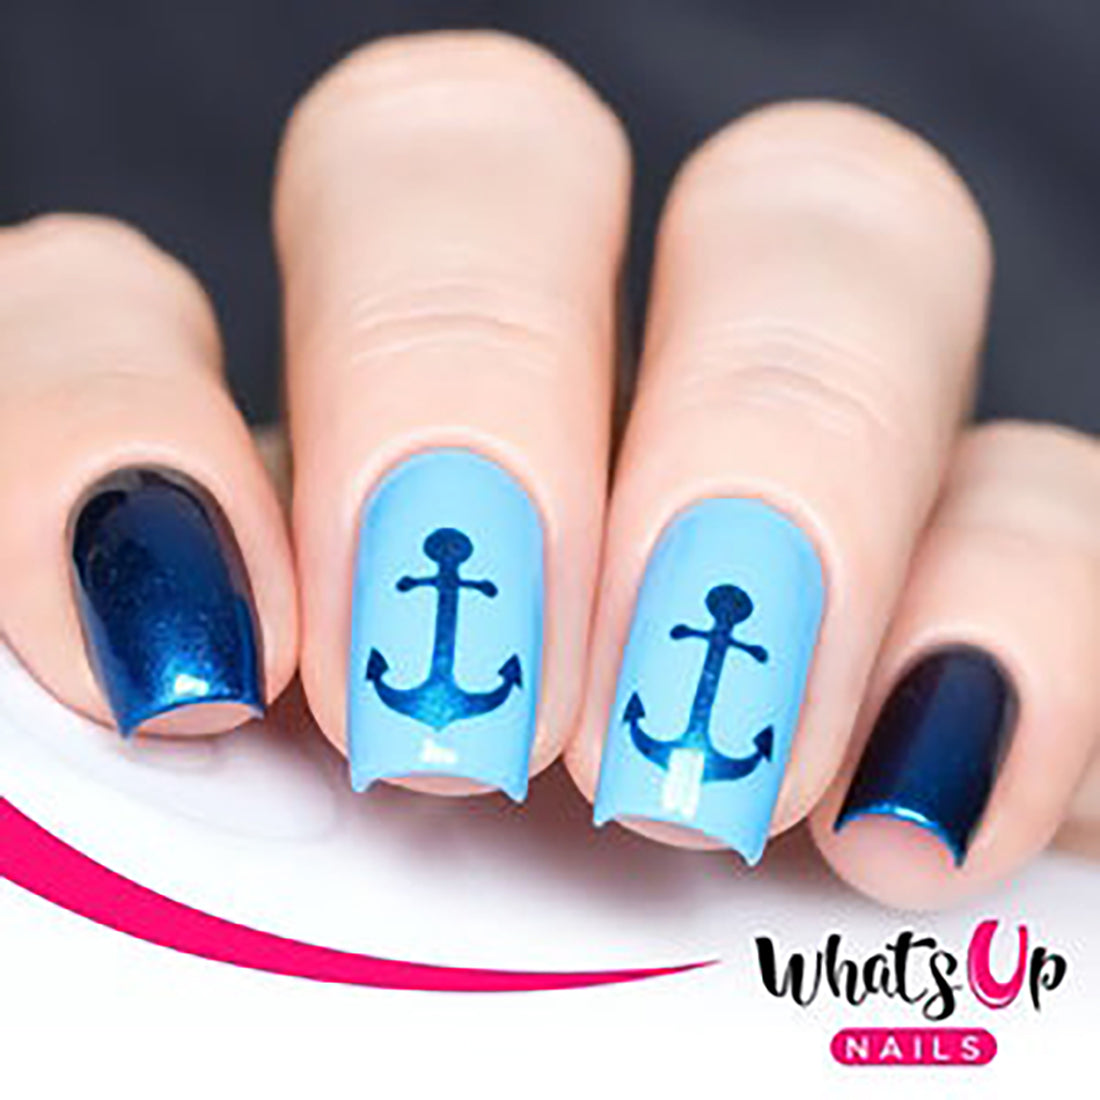 Whats Up Nails -Anchor Stencils